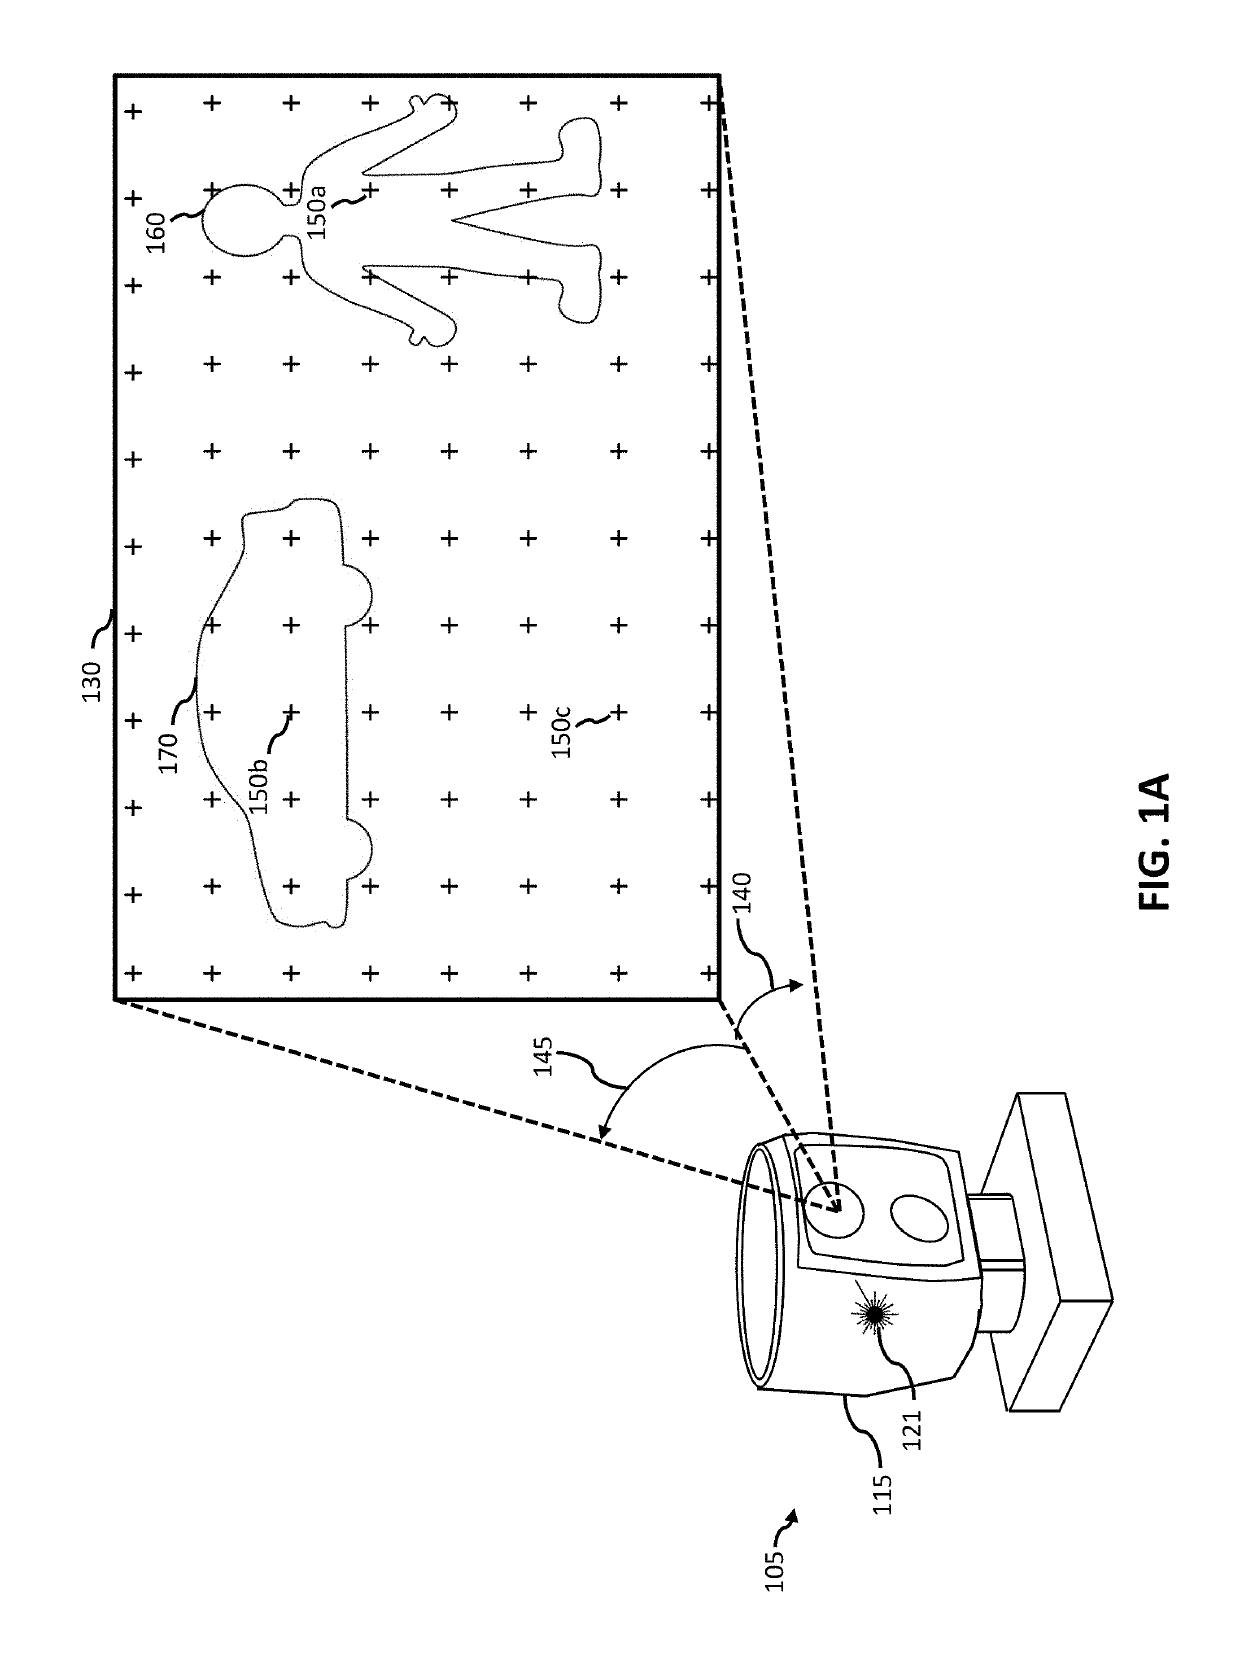 Vehicle-integrated lidar system